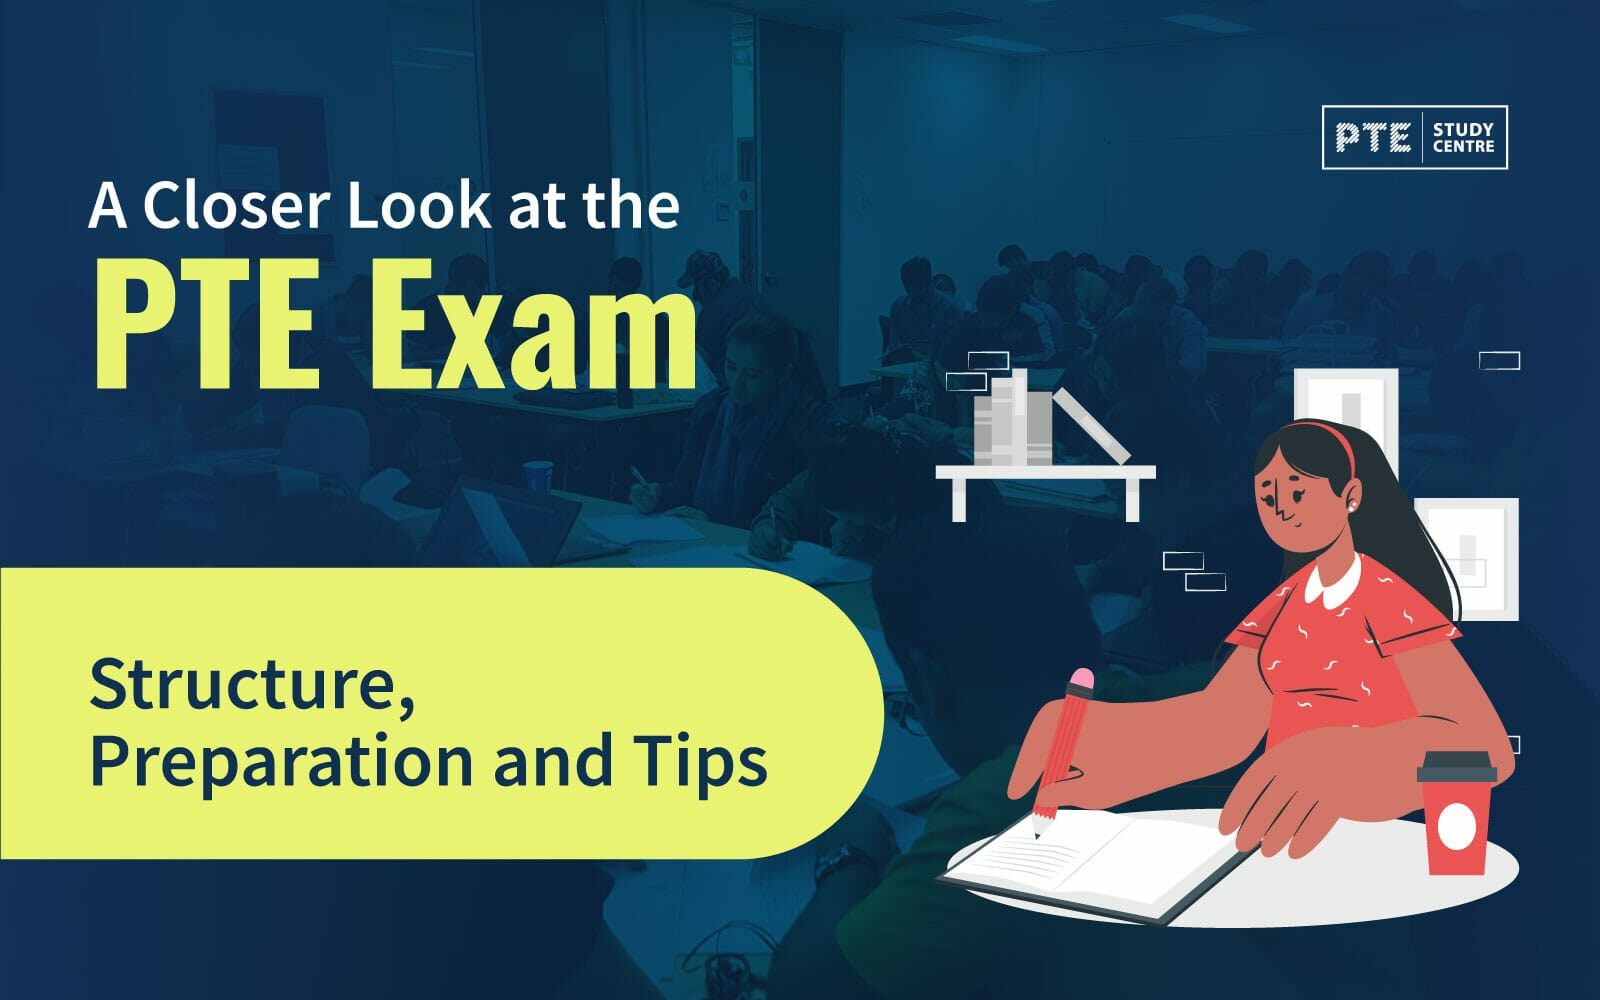 A Closer Look at the PTE Exam: Structure, Preparation and Tips